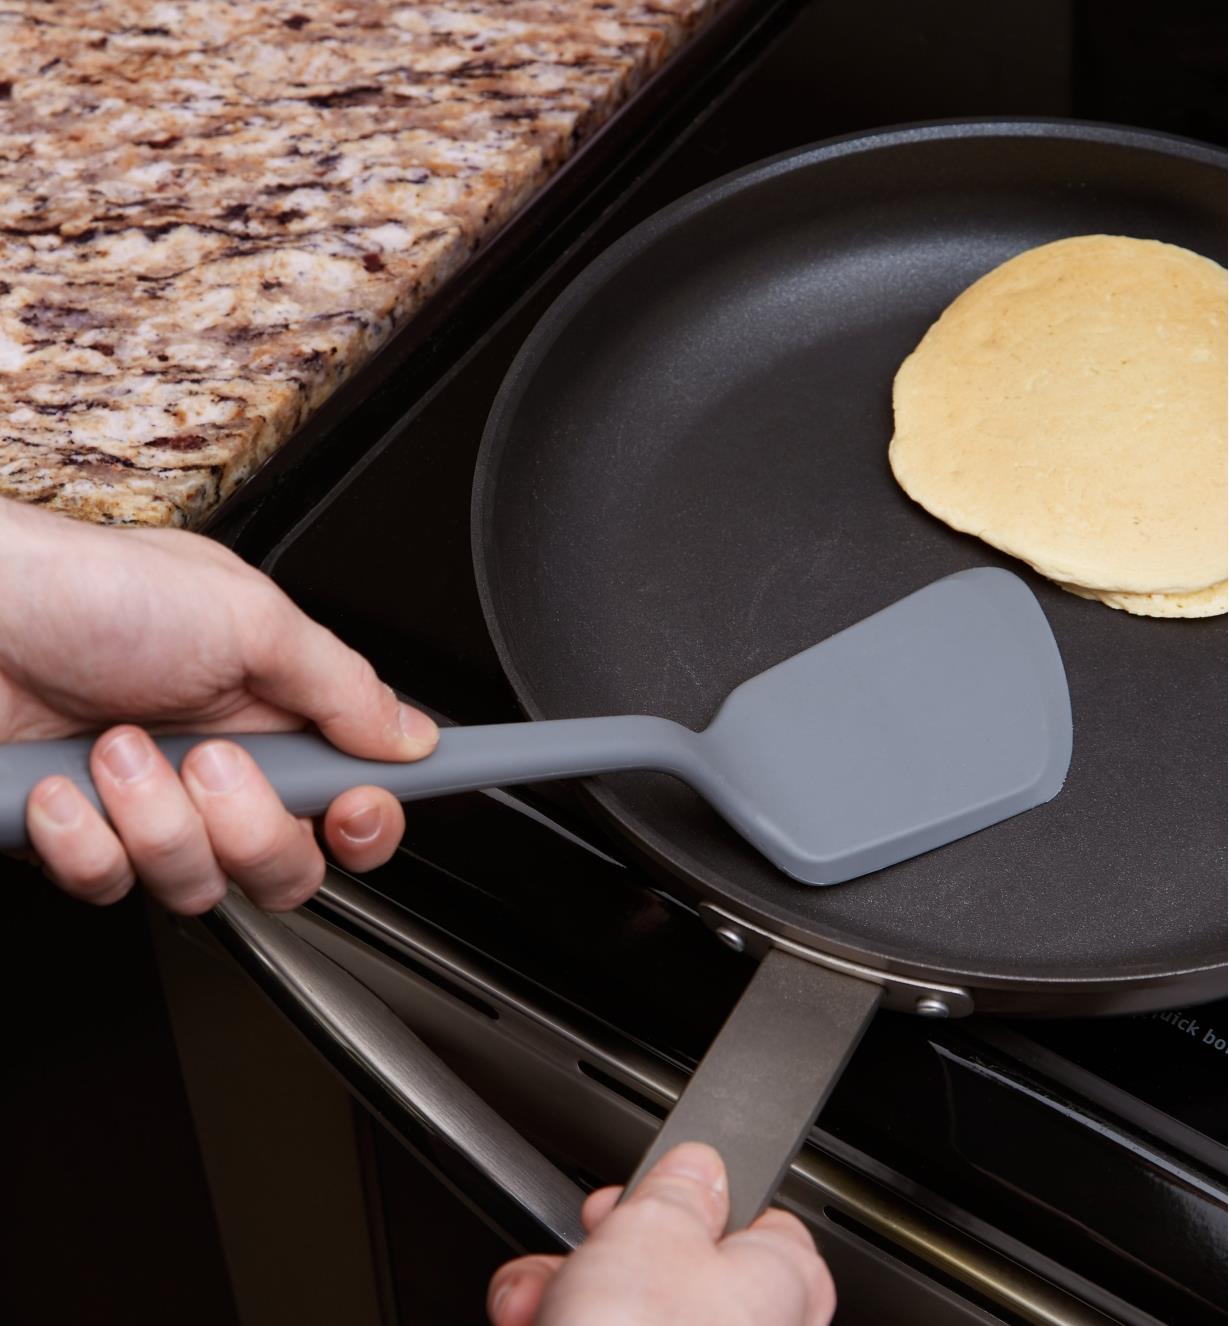 Flipping a pancake with the left-hand Silicone Flipper